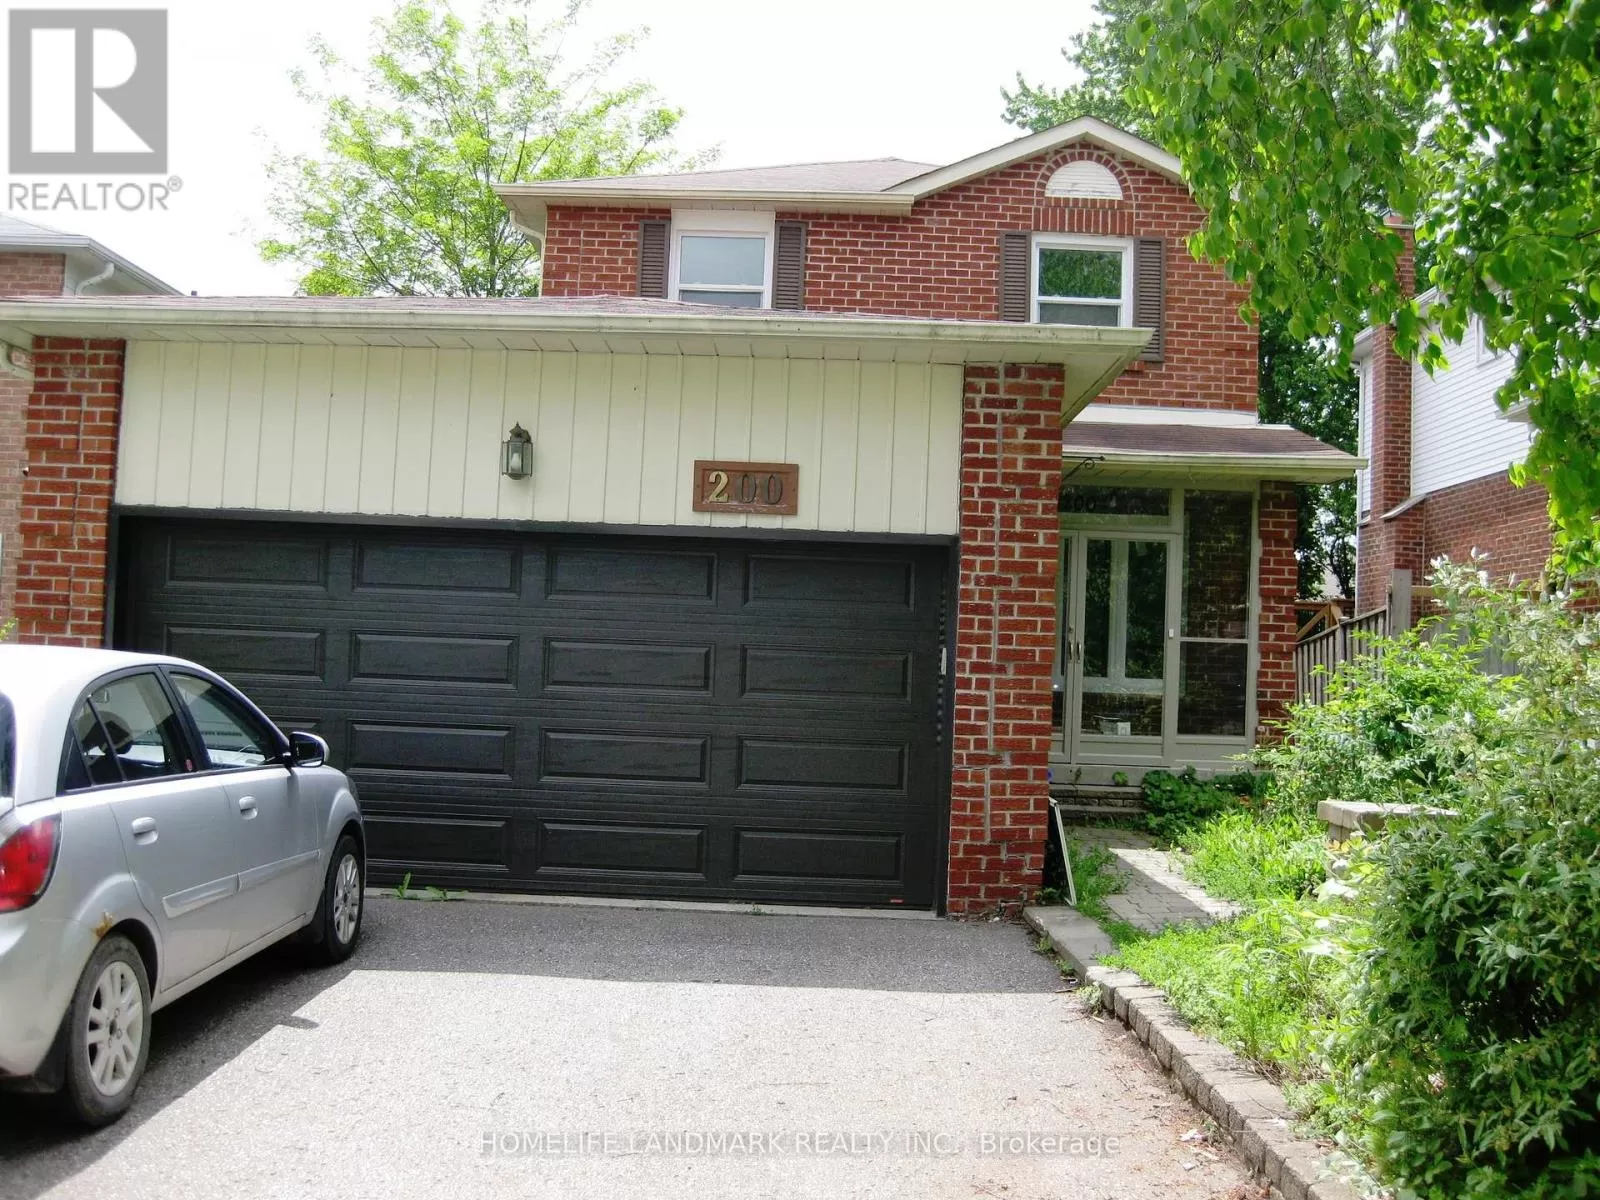 House for rent: 200 Forsyth Road, Newmarket, Ontario L3Y 7Y1